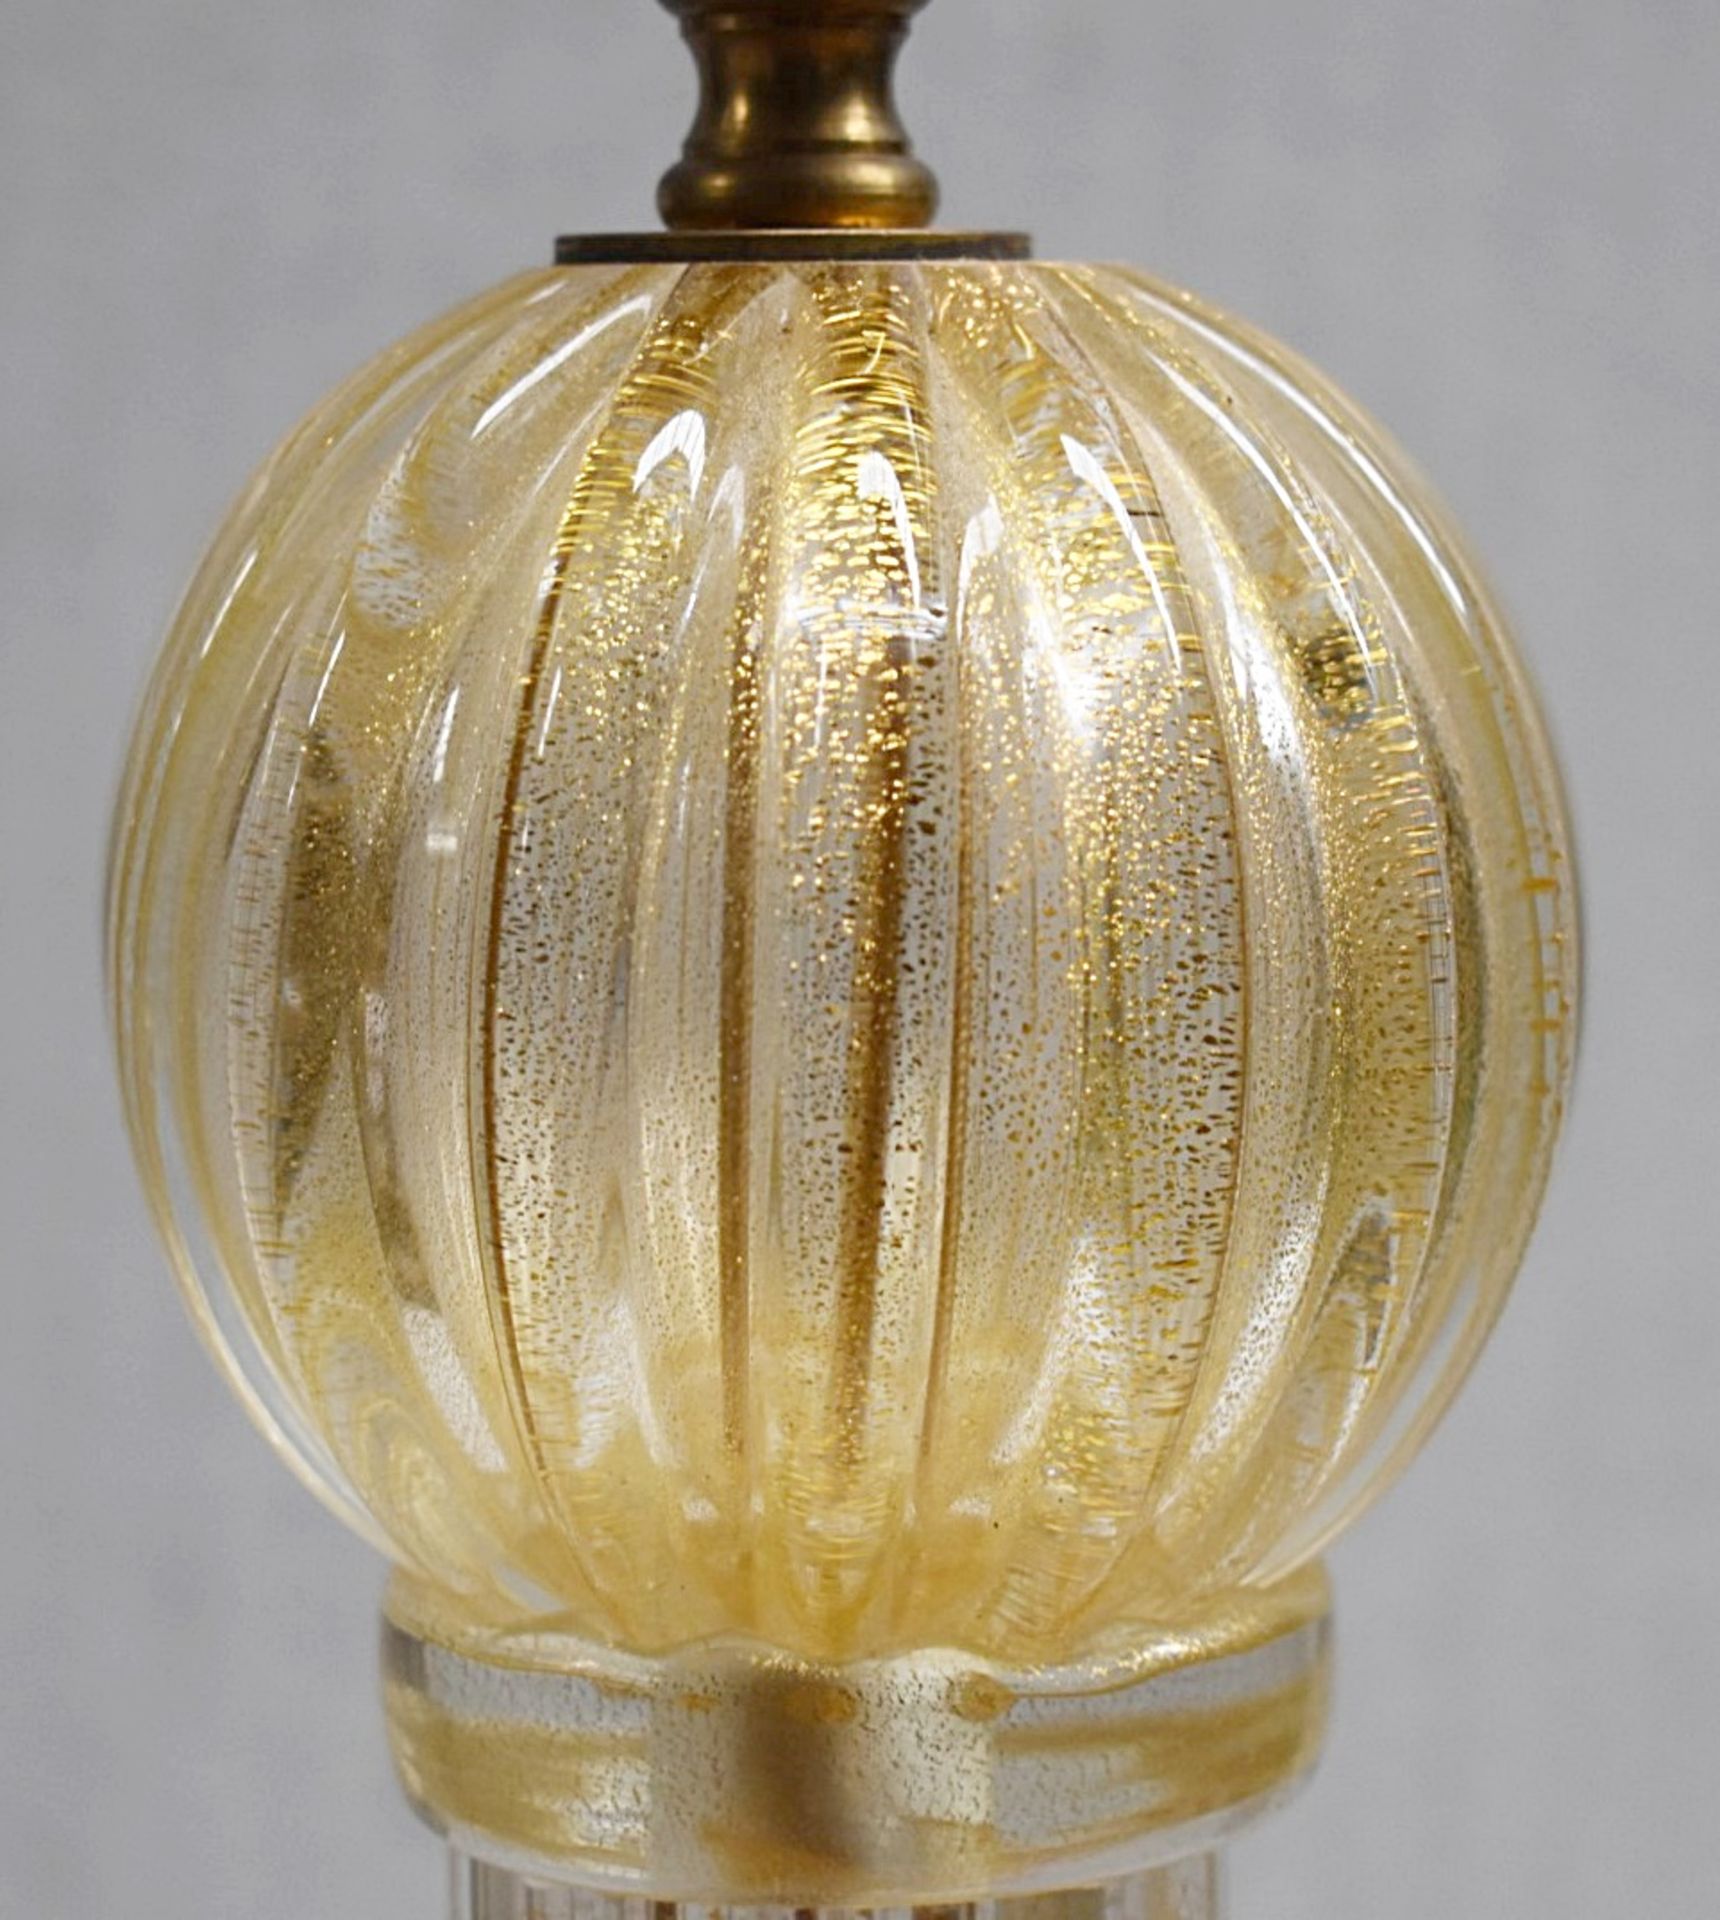 1 x Elegant Handcrafted Italian Murano Glass Table Lamp Infused With 24K Gold Leaf - Made In - Image 5 of 10